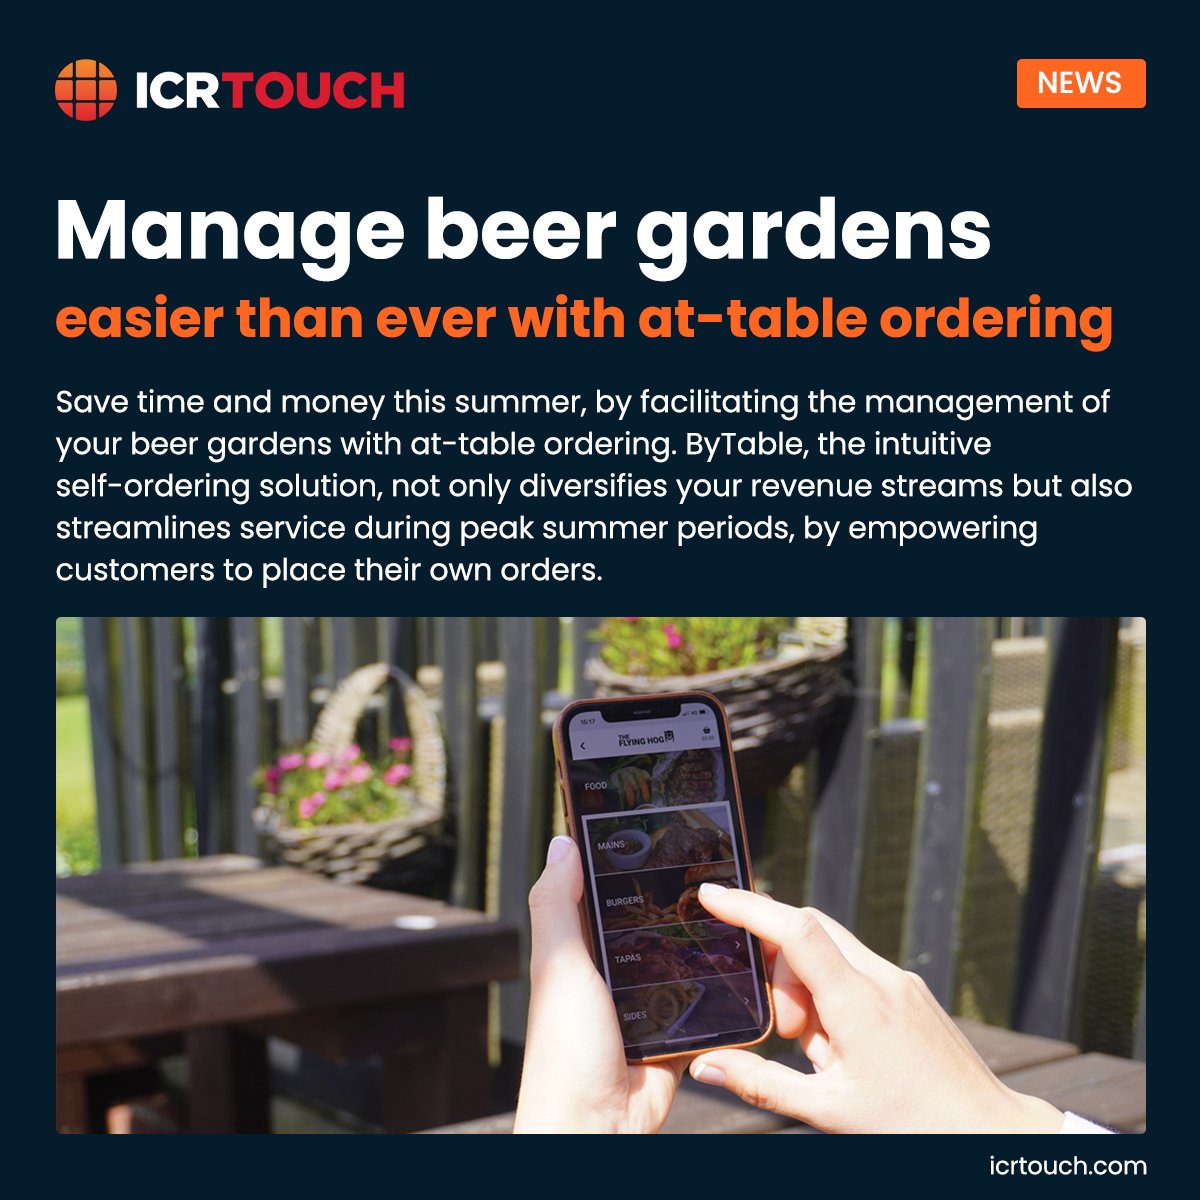 In this article we’ll dive into the range of operational benefits of ByTable and how these features can completely streamline the management of your beer gardens in the upcoming summer season ☀️

Read the full article here: bit.ly/3U64Deo

#weareICRTouch #beergardens